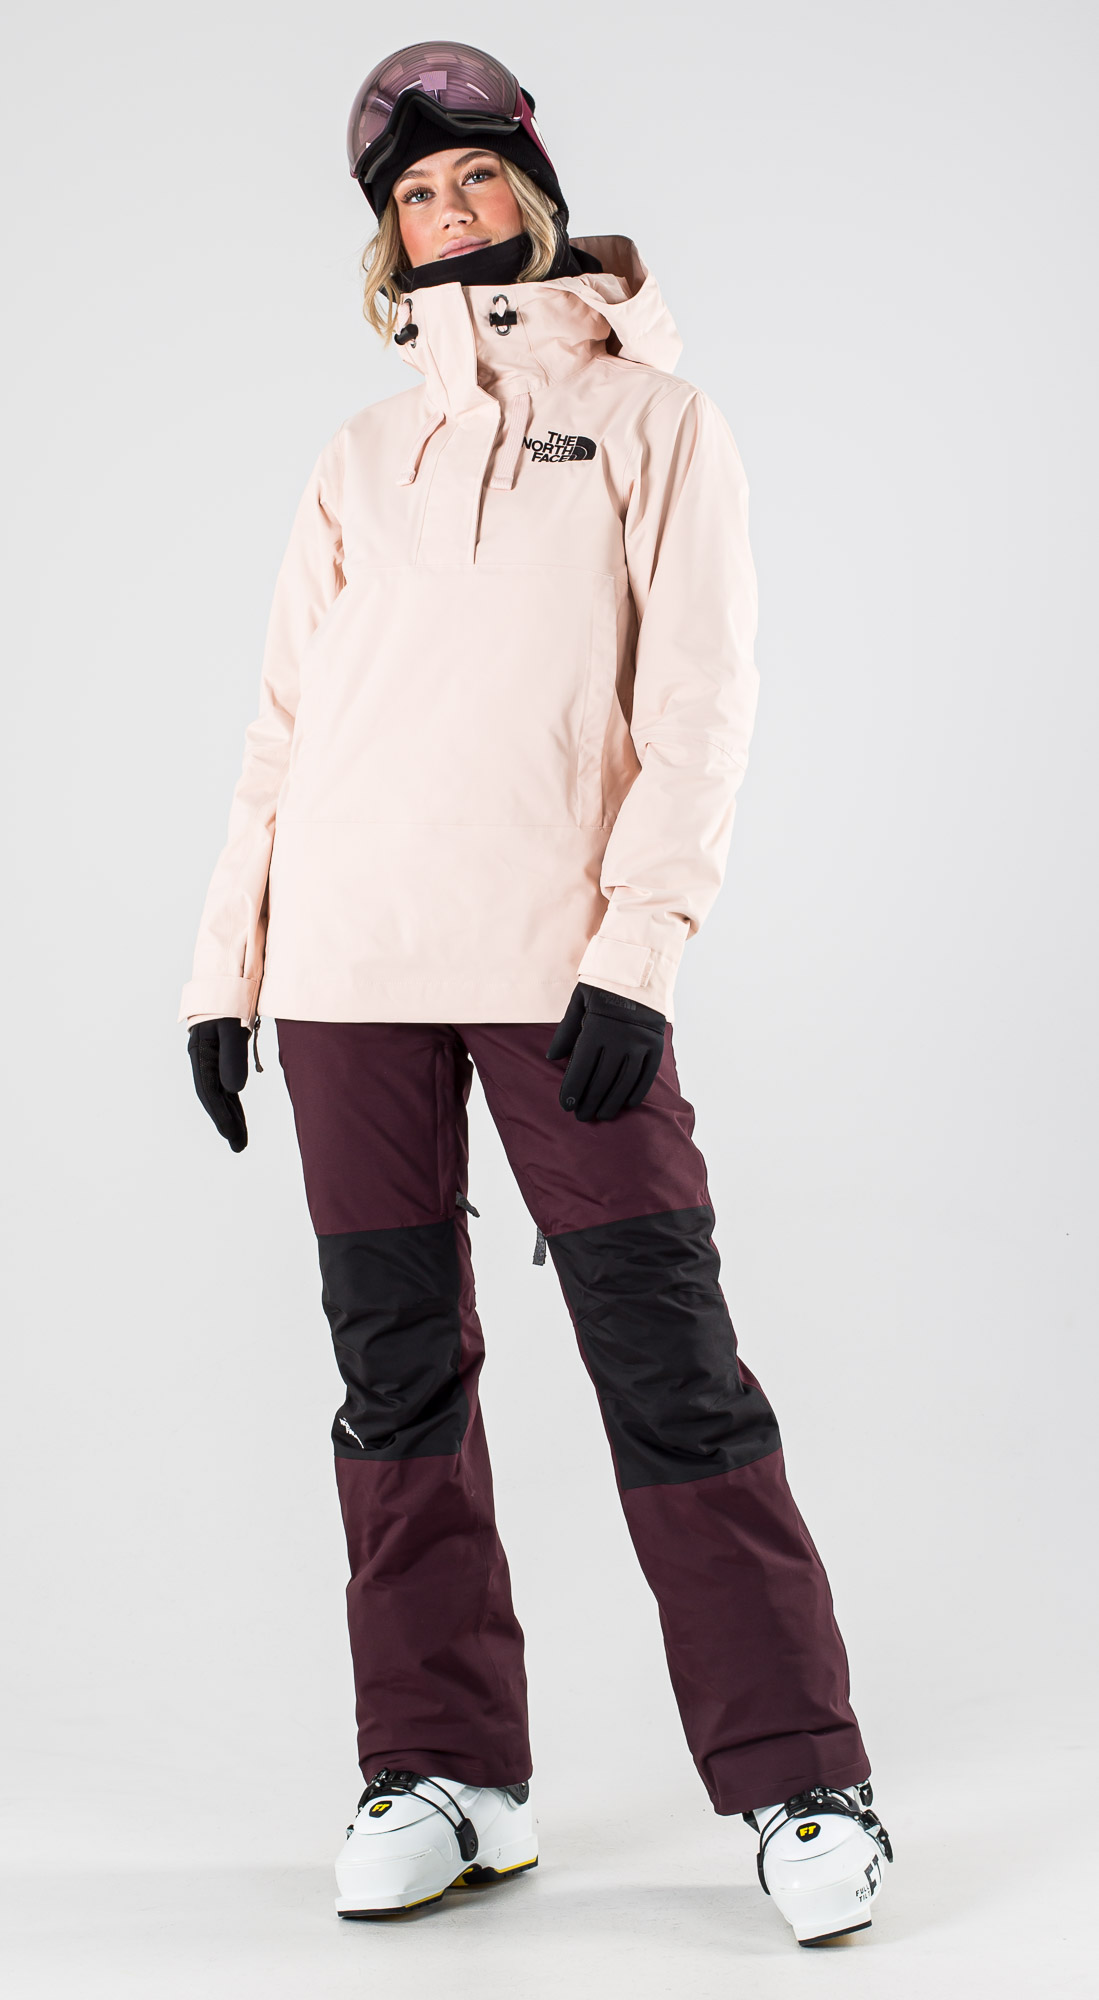 the north face ski clothing